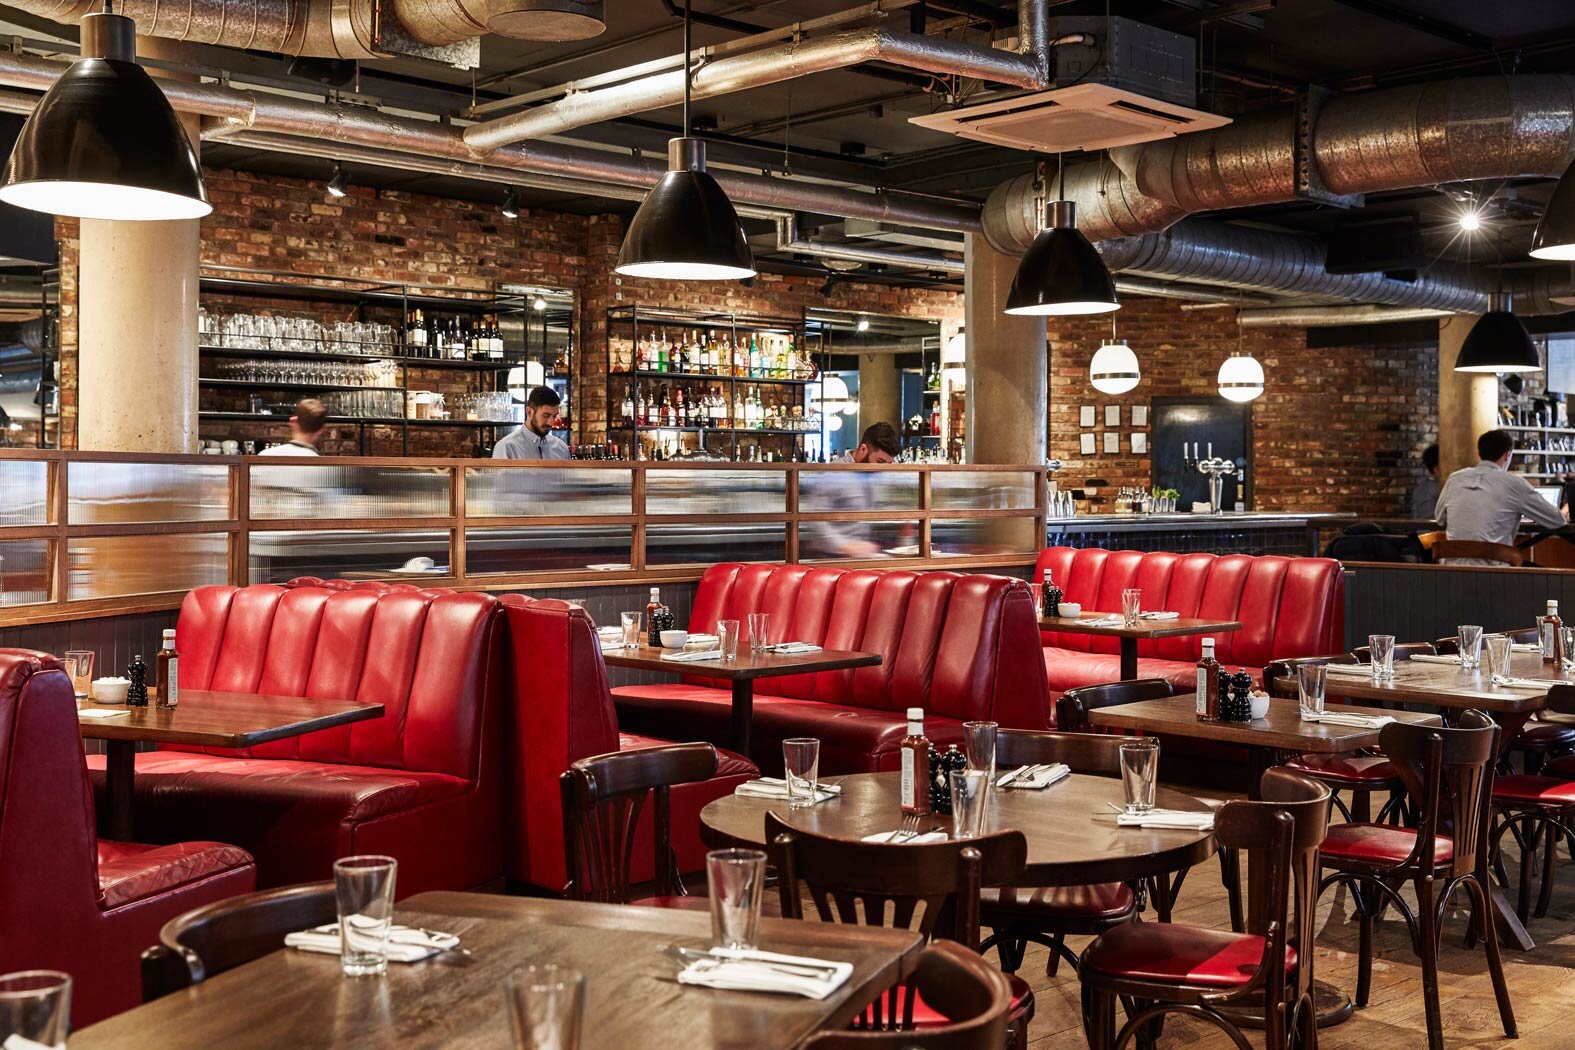 Hoxton Shoreditch and Holborn hotels sold in £215m deal